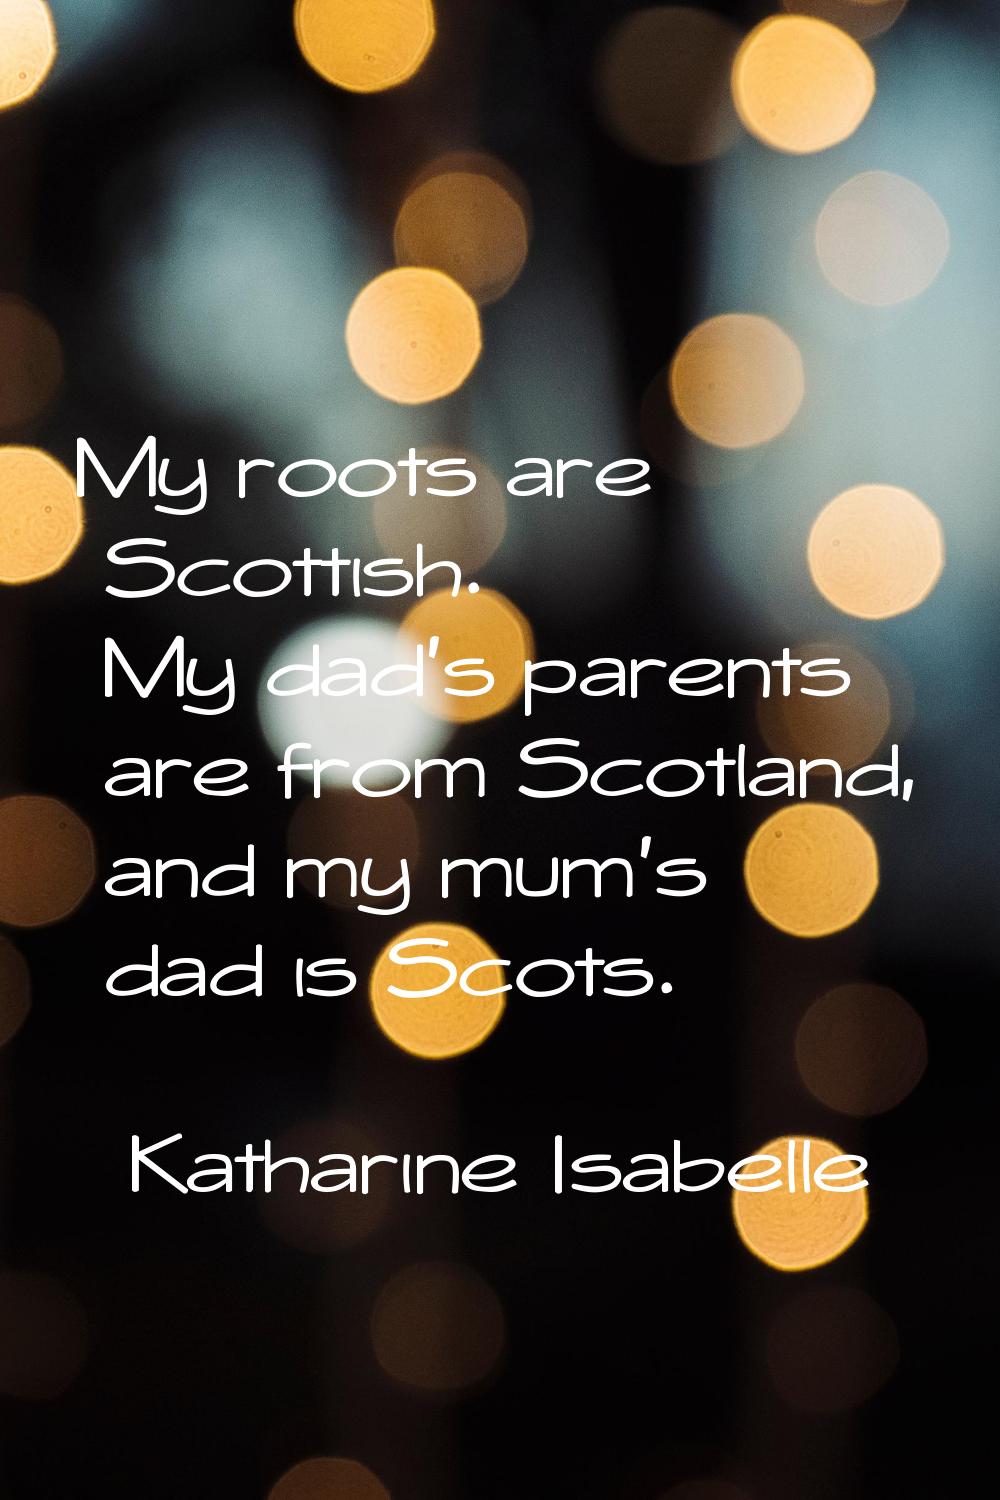 My roots are Scottish. My dad's parents are from Scotland, and my mum's dad is Scots.